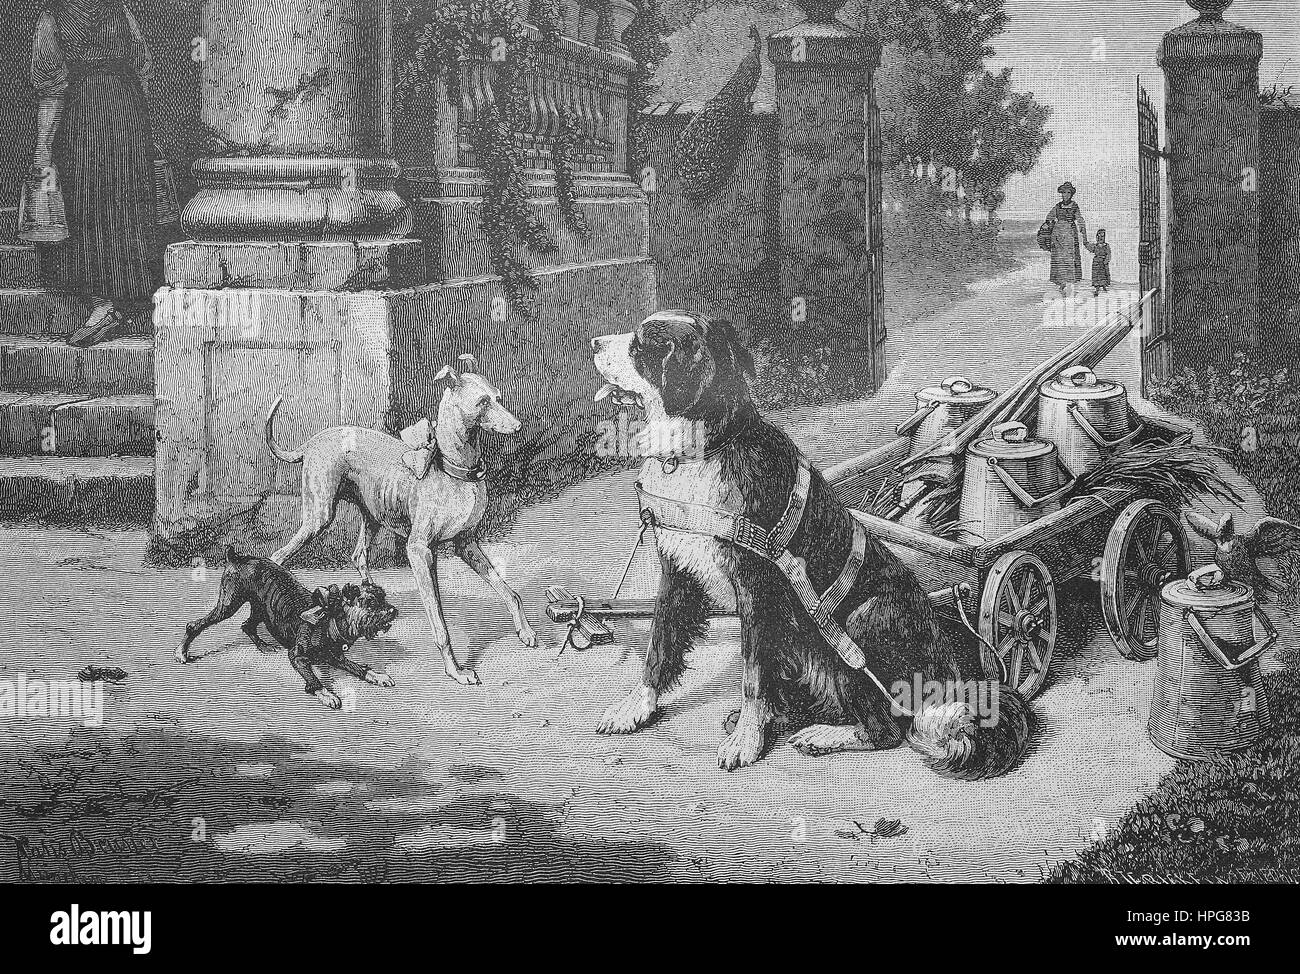 Dog as a draft animal for a cart with milk cans, dog as a working bull, Hund als Zugtier f?r einen Karren mit Milchkannen, Hund als Arbeitstier, digital improved reproduction of a woodcut from the year 1885 Stock Photo